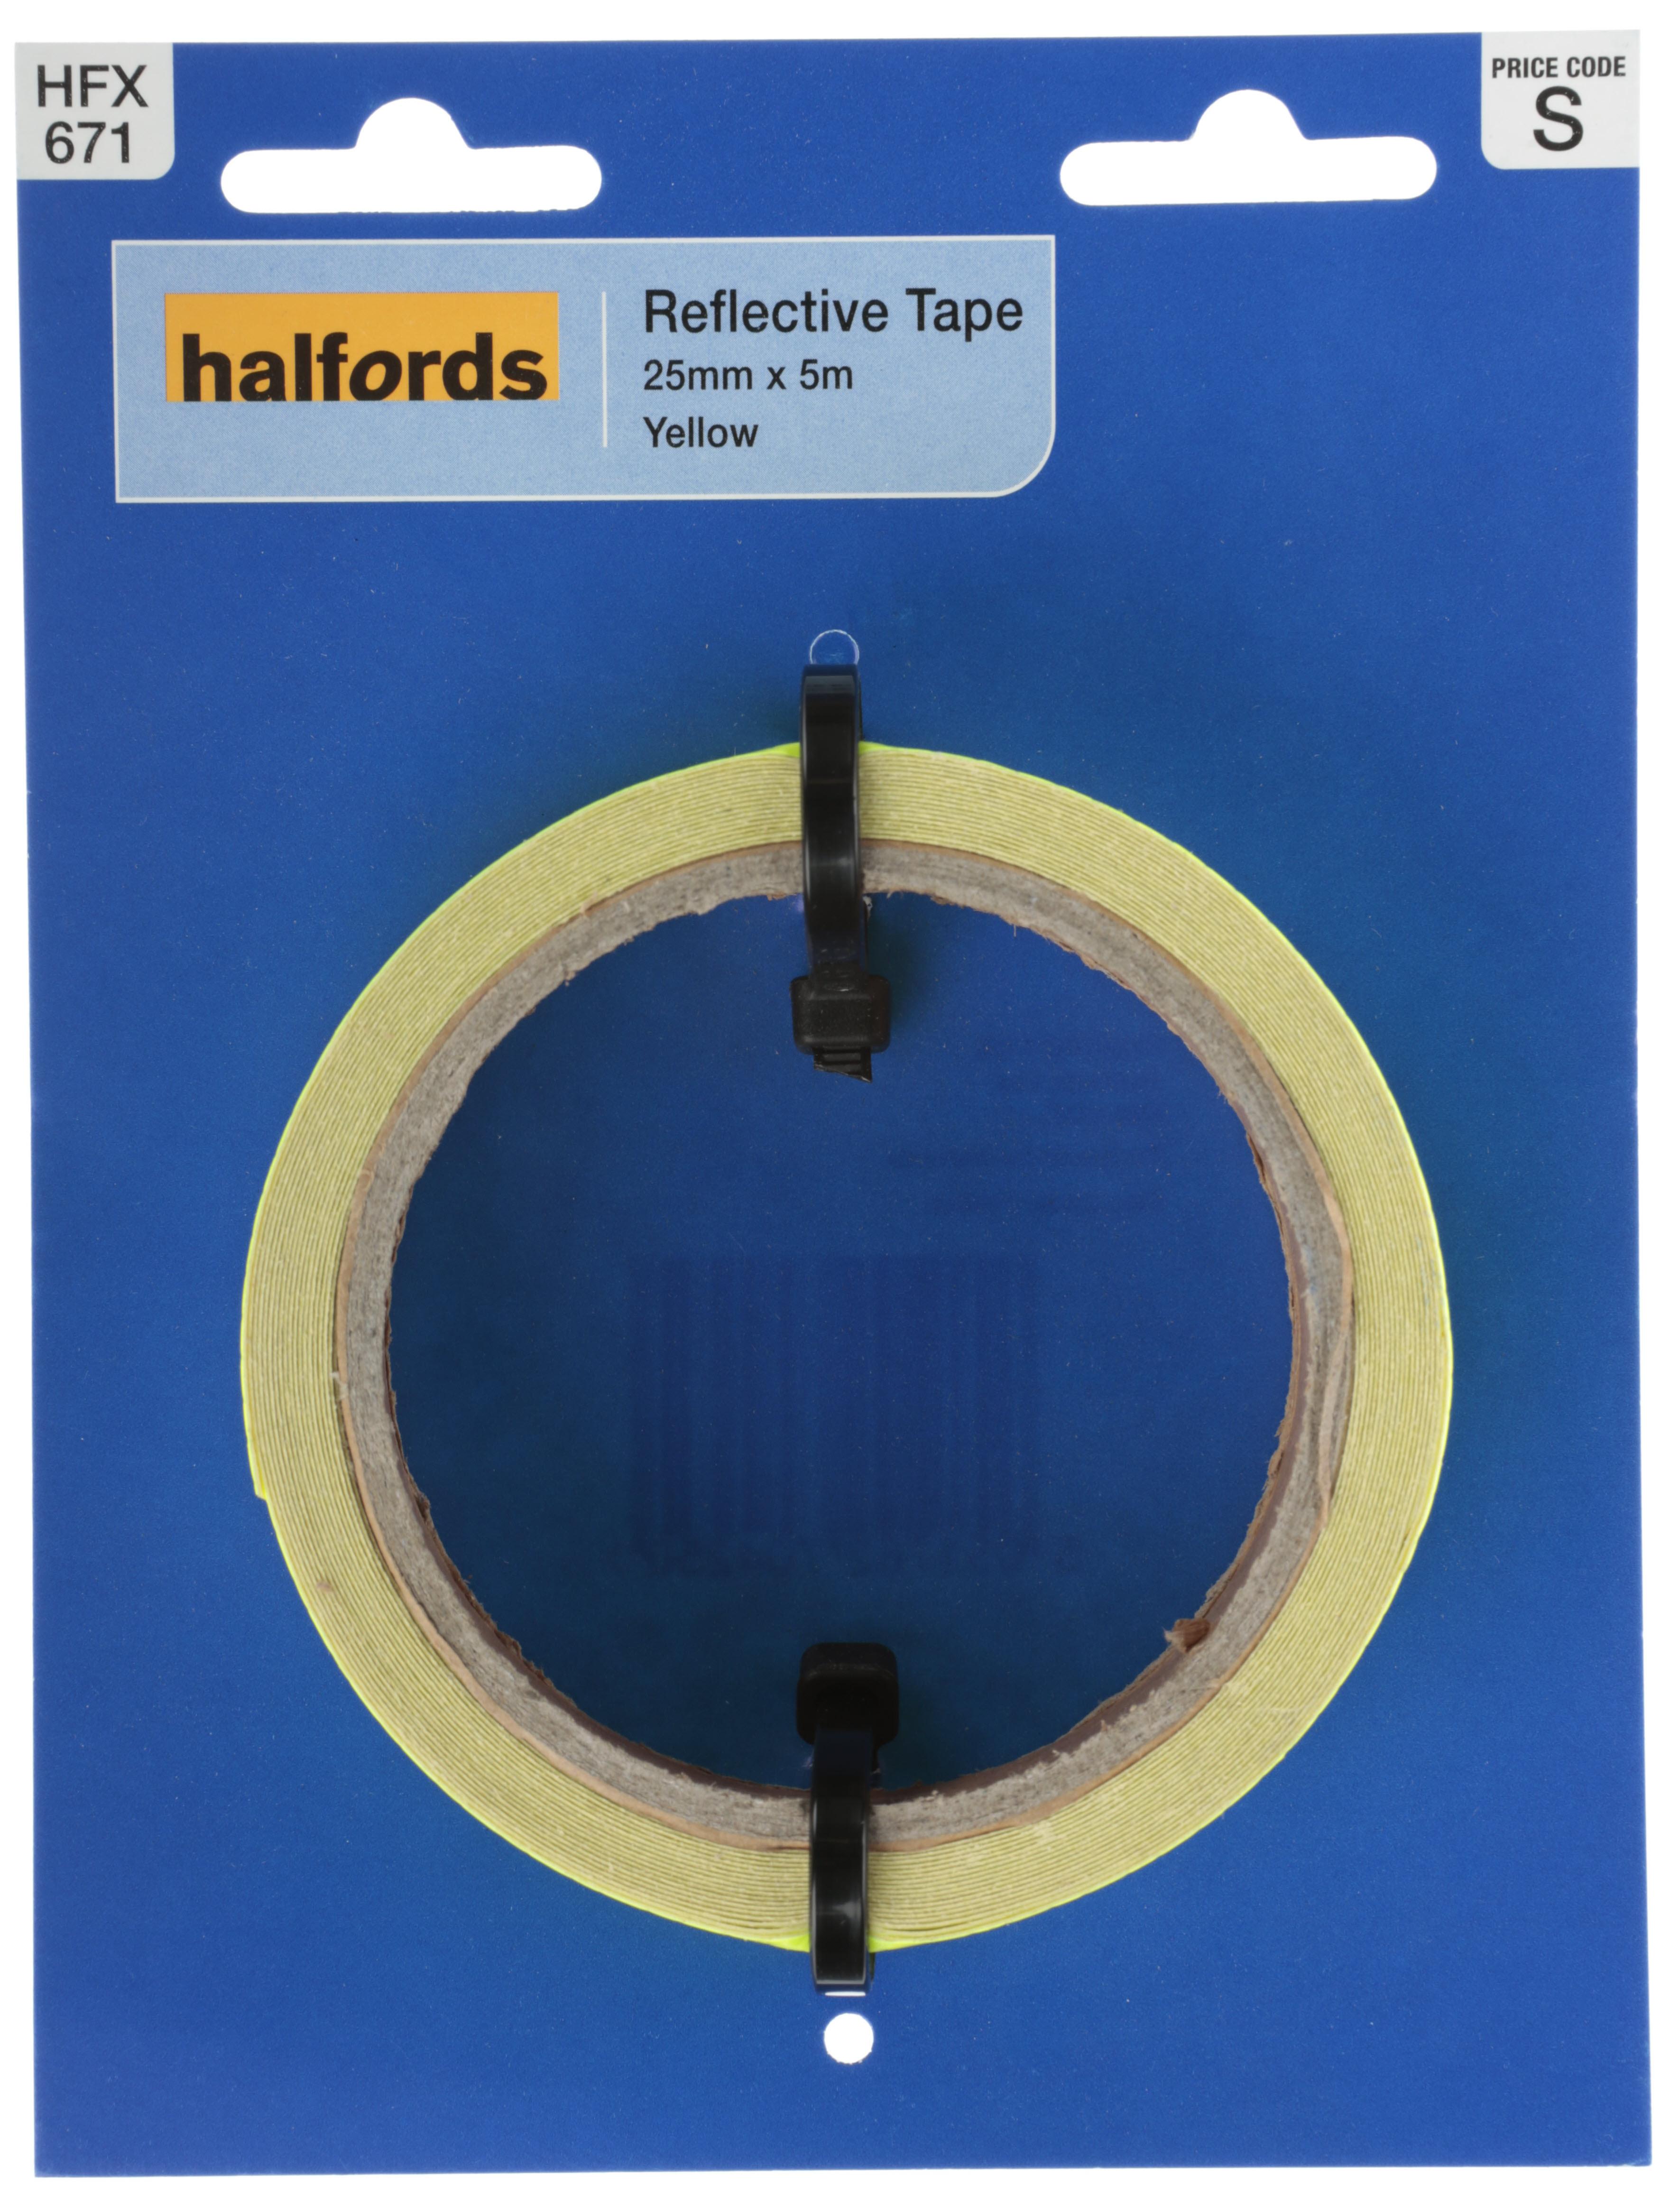 Halfords Reflective Tape Yellow 25Mm X 5M (Hfx671)